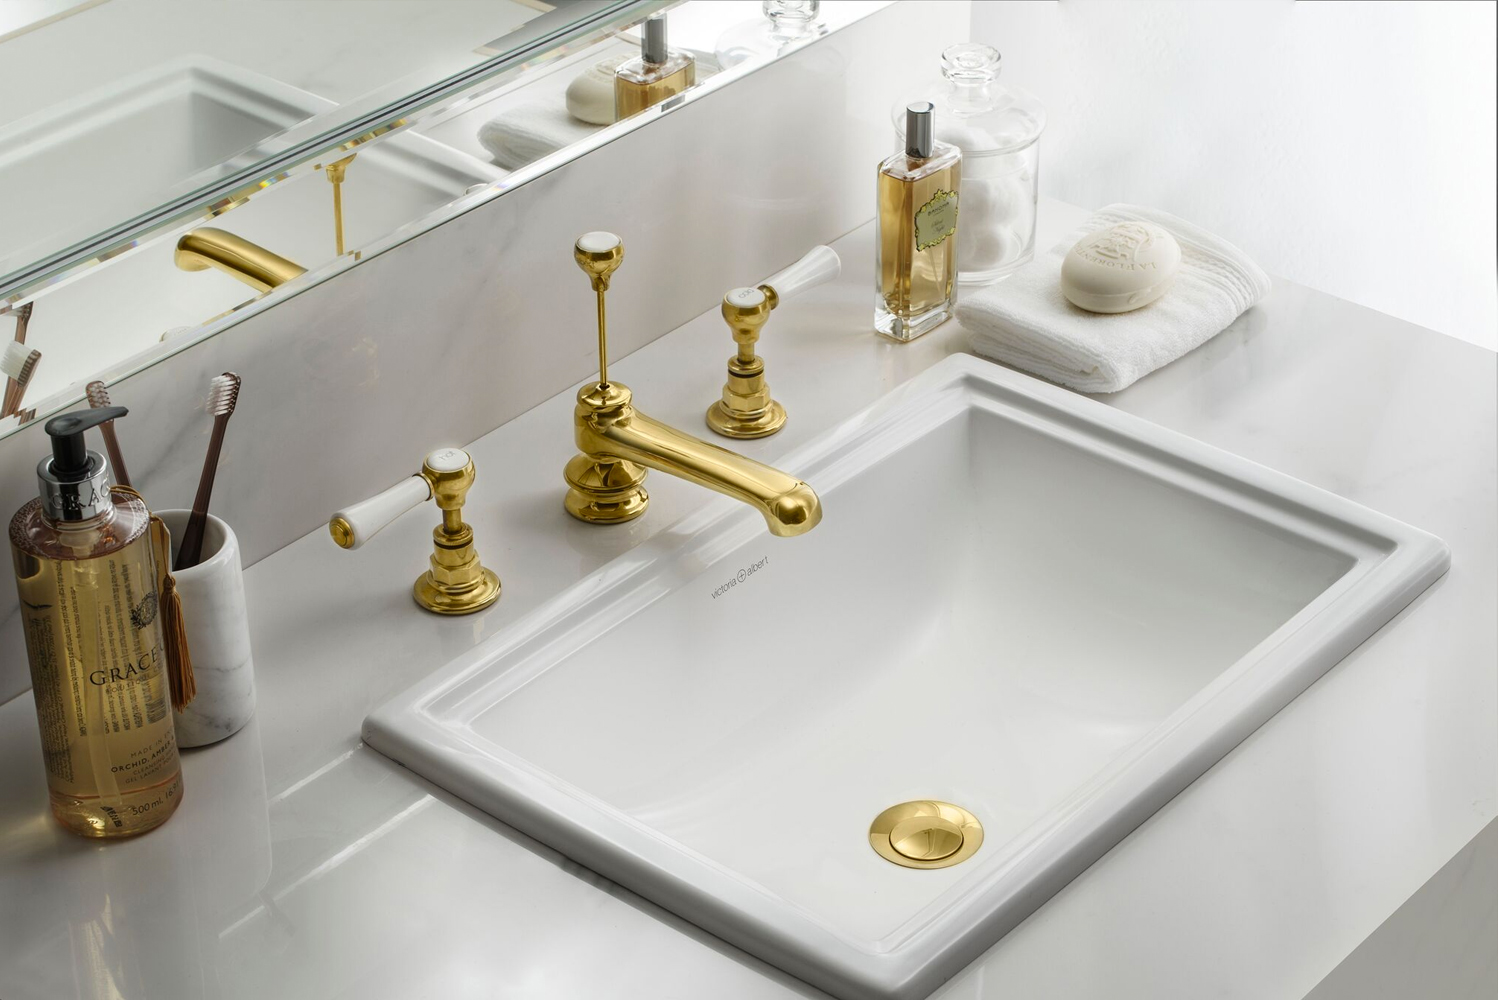 Victoria  Albert introduced a new bathtub-and-basin duo known as the Pembroke collection 